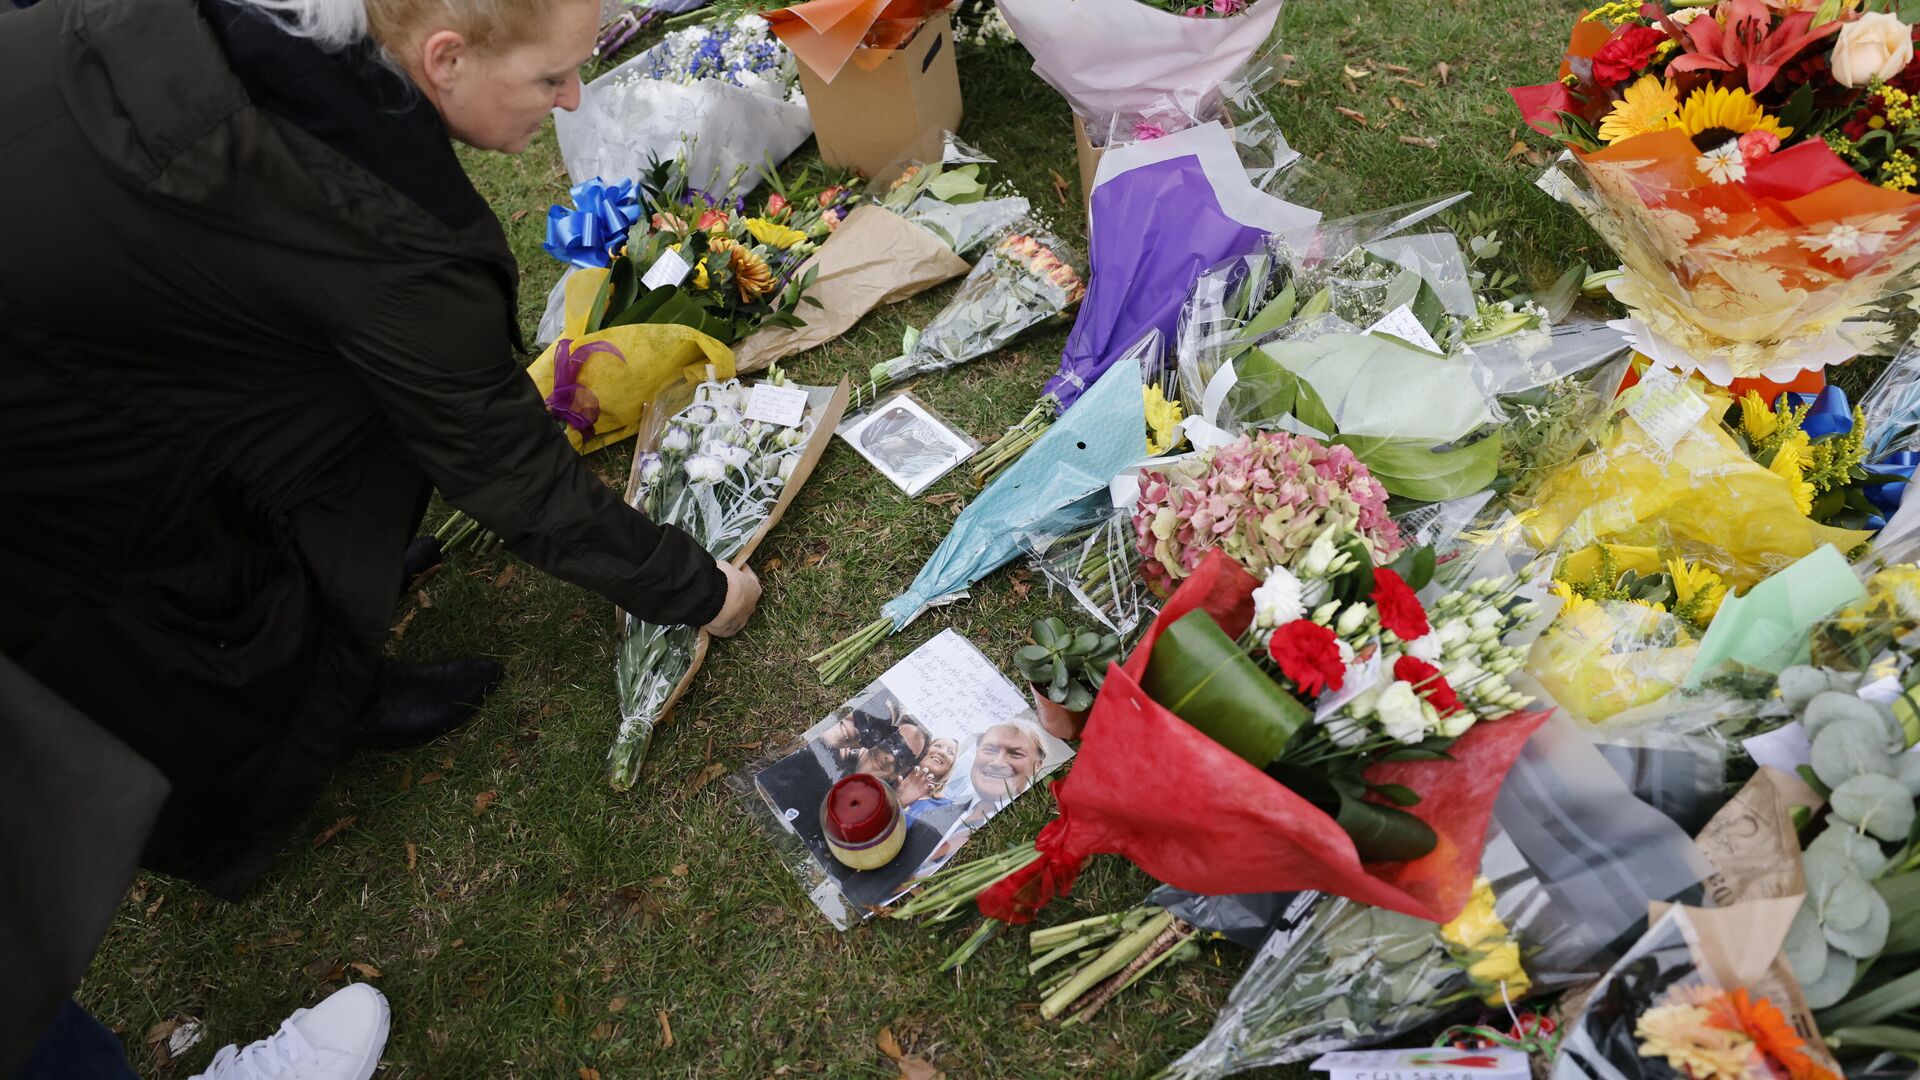 A member of the public adds a bunch of flowers to floral tributes left at the scene of the fatal stabbing of Conservative British lawmaker David Amess, at Belfairs Methodist Church in Leigh-on-Sea, a district of Southend-on-Sea, in southeast England on October 16, 2021. - Sputnik International, 1920, 16.10.2021